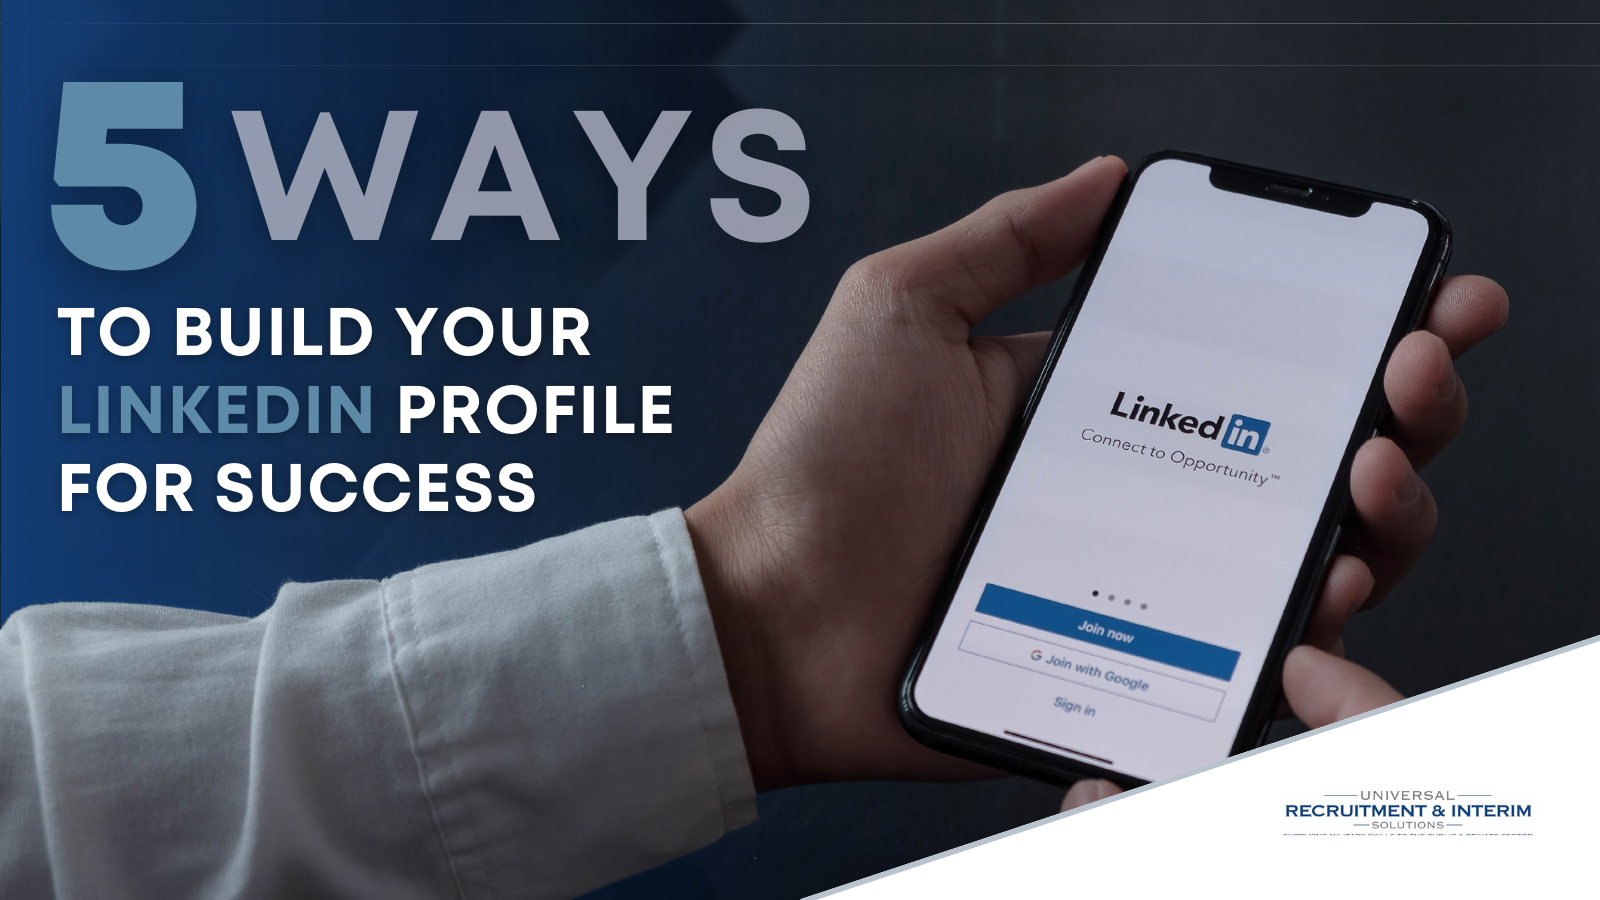 How To Build Your LinkedIn Profile for Success